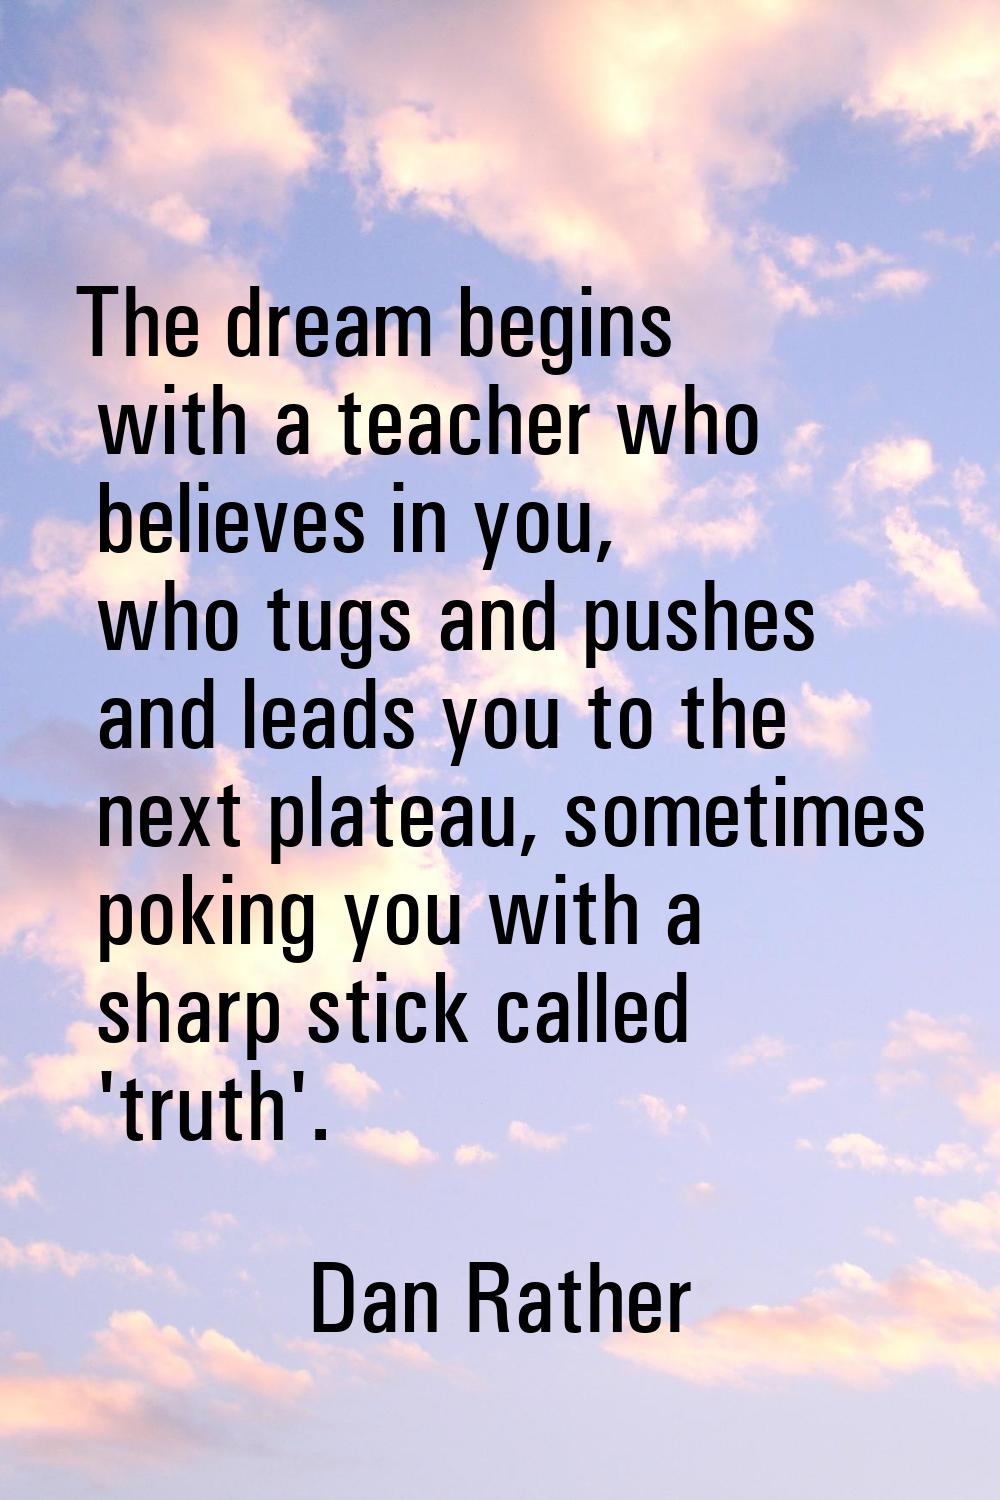 The dream begins with a teacher who believes in you, who tugs and pushes and leads you to the next 